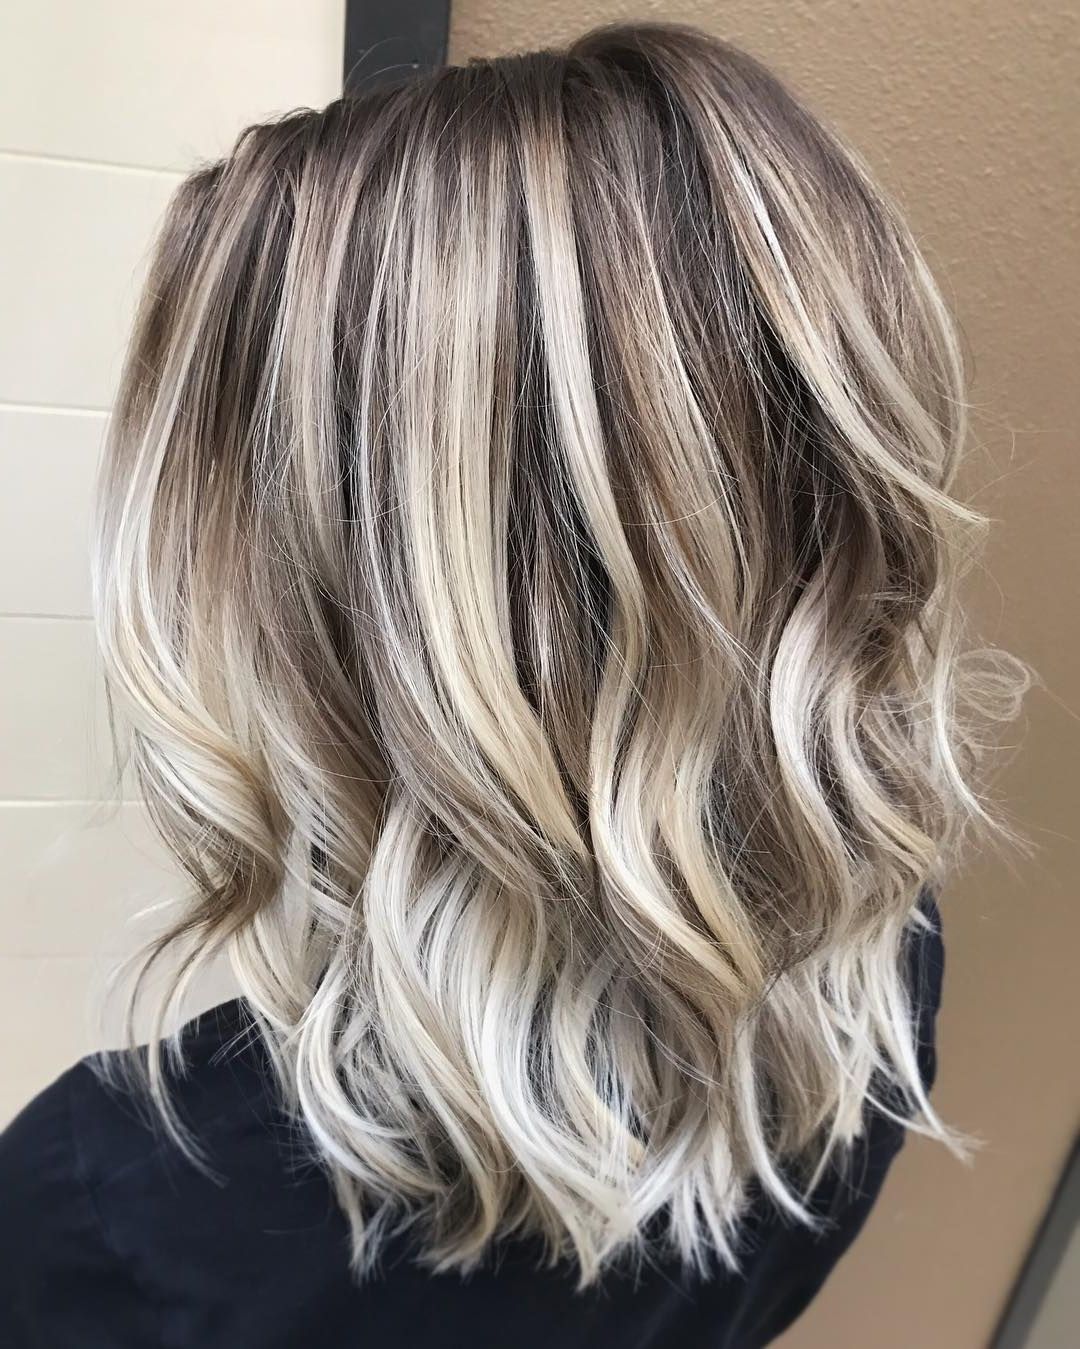 Famous Feathered Ash Blonde Hairstyles Within 10 Ash Blonde Hairstyles For All Skin Tones, 2018 Best Hair Color Trends (View 2 of 20)